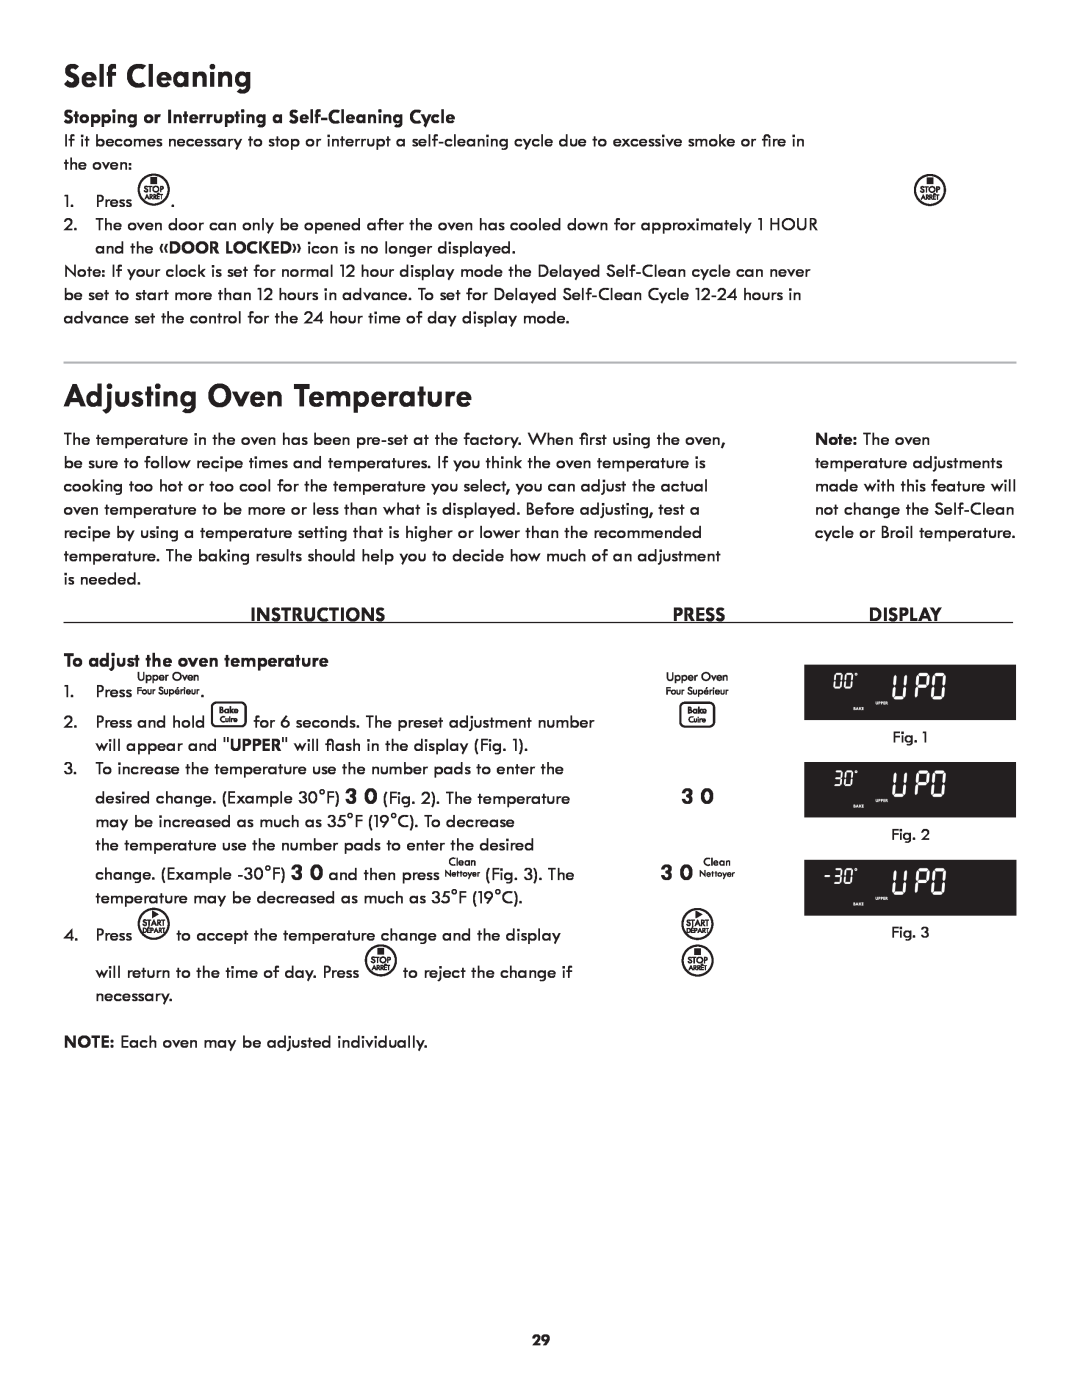 Kenmore 318205342A Self Cleaning, Adjusting Oven Temperature, Stopping or Interrupting a Self-Cleaning Cycle, Instructions 